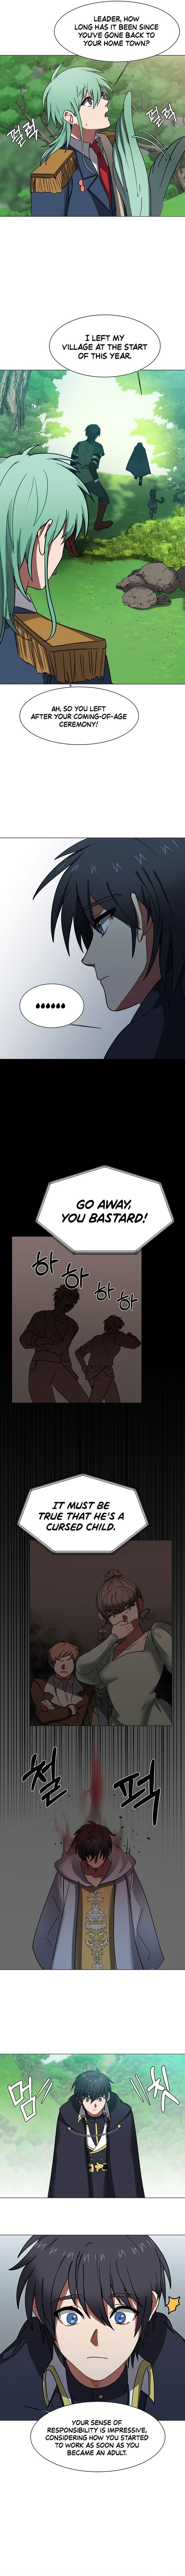 Estio Chapter 50 Page 3